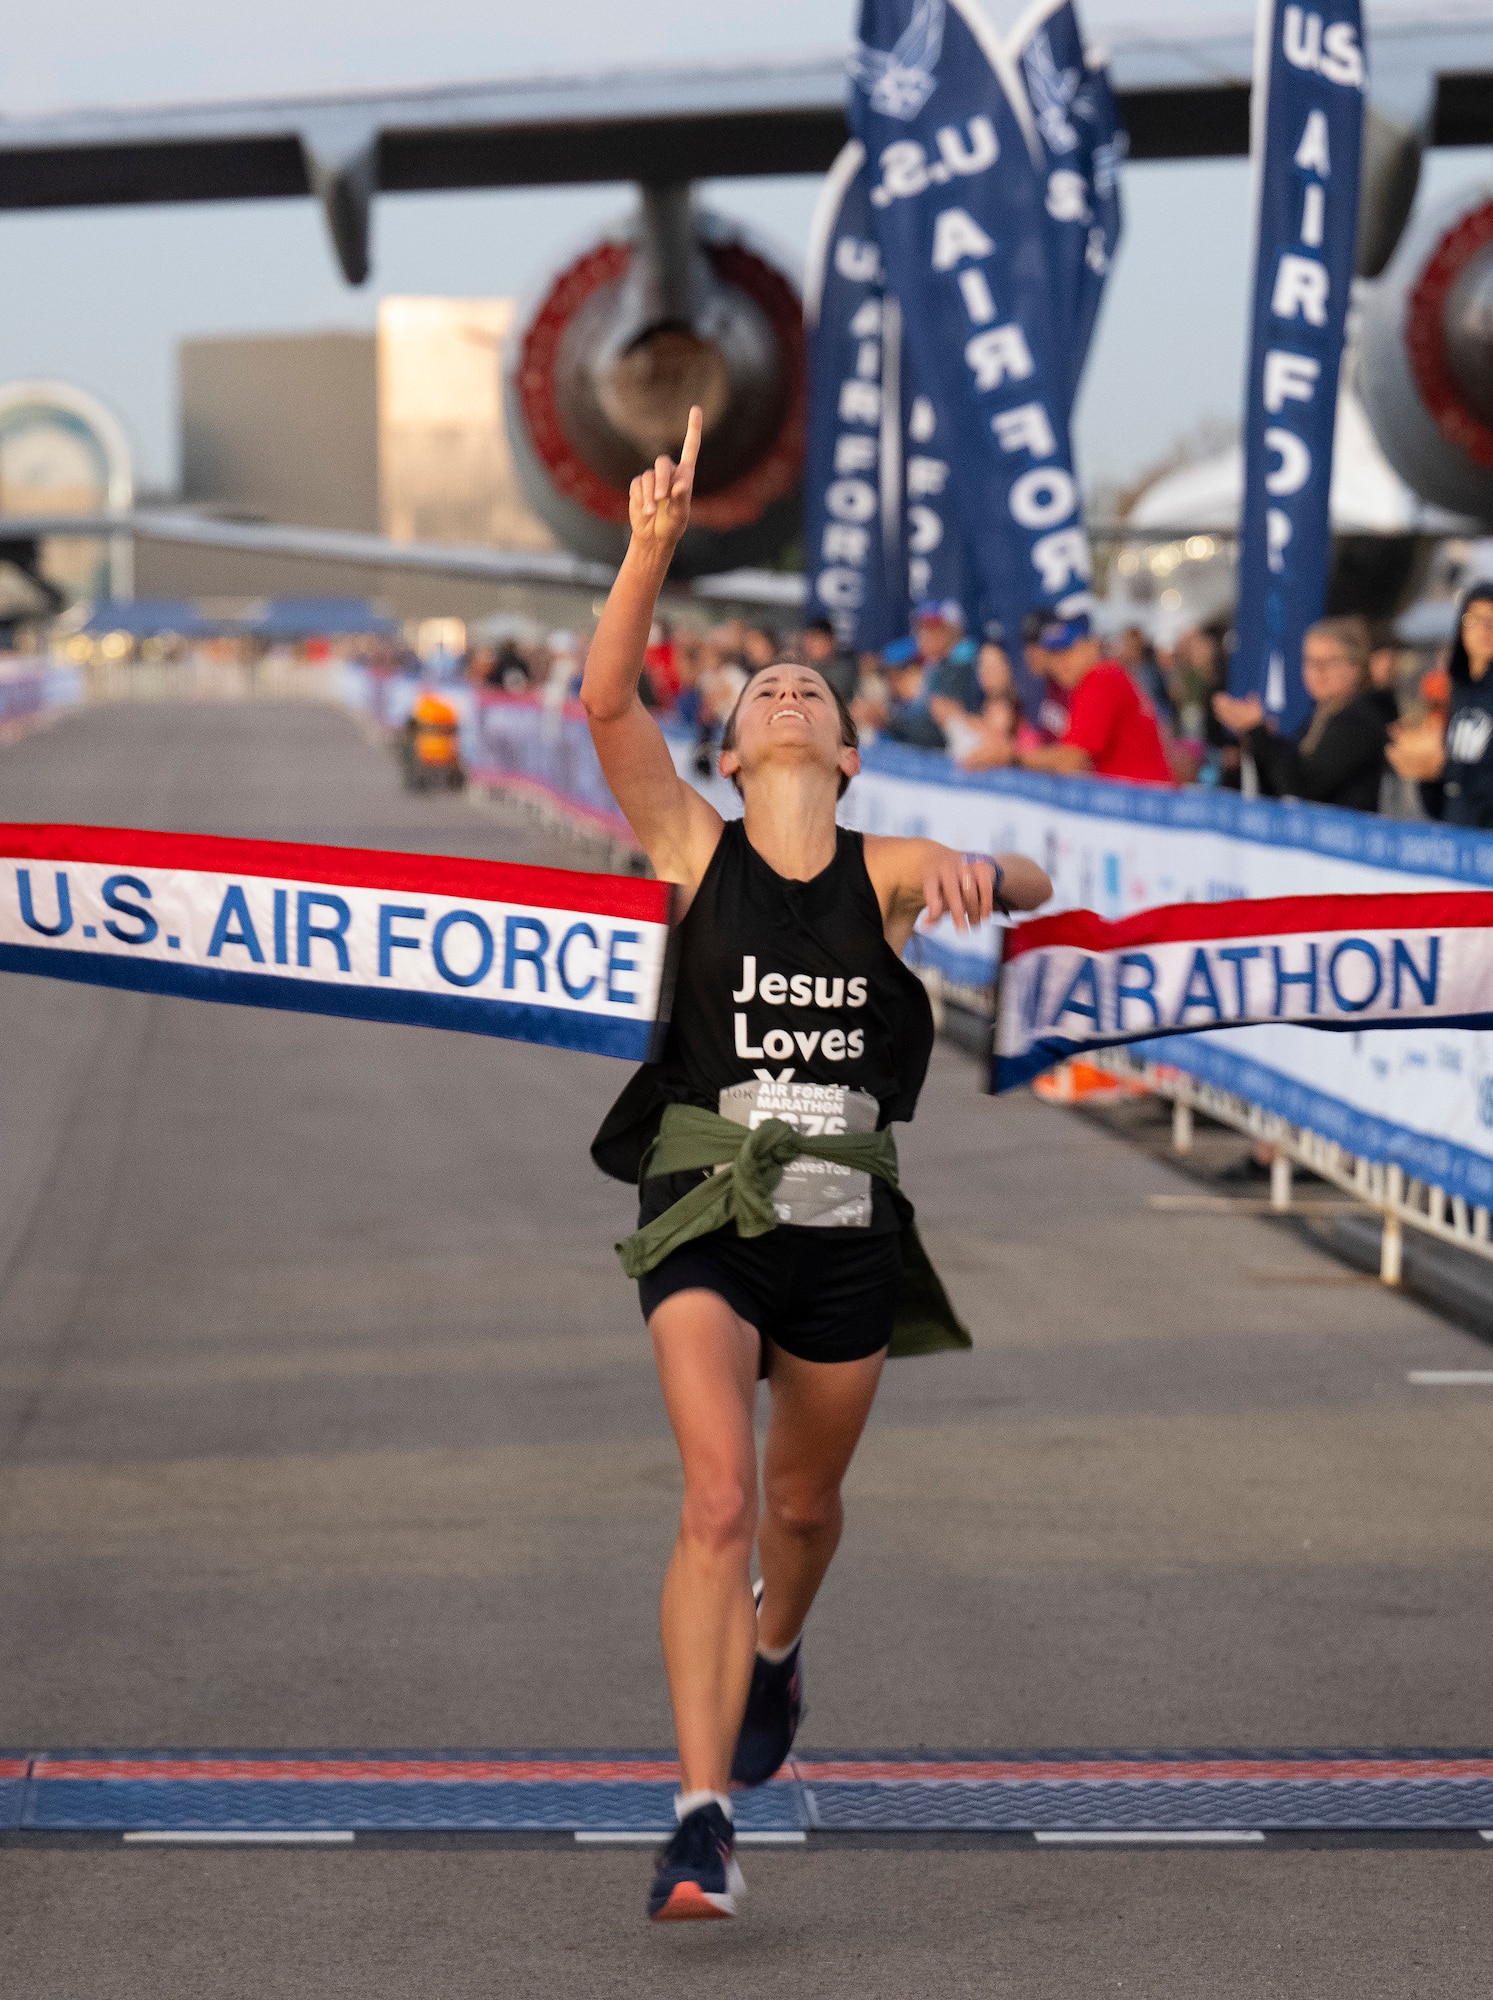 A woman in black athletic clothes points to the sky as she breaks a red, white and blue banner with "US Air Force Marathon" on it